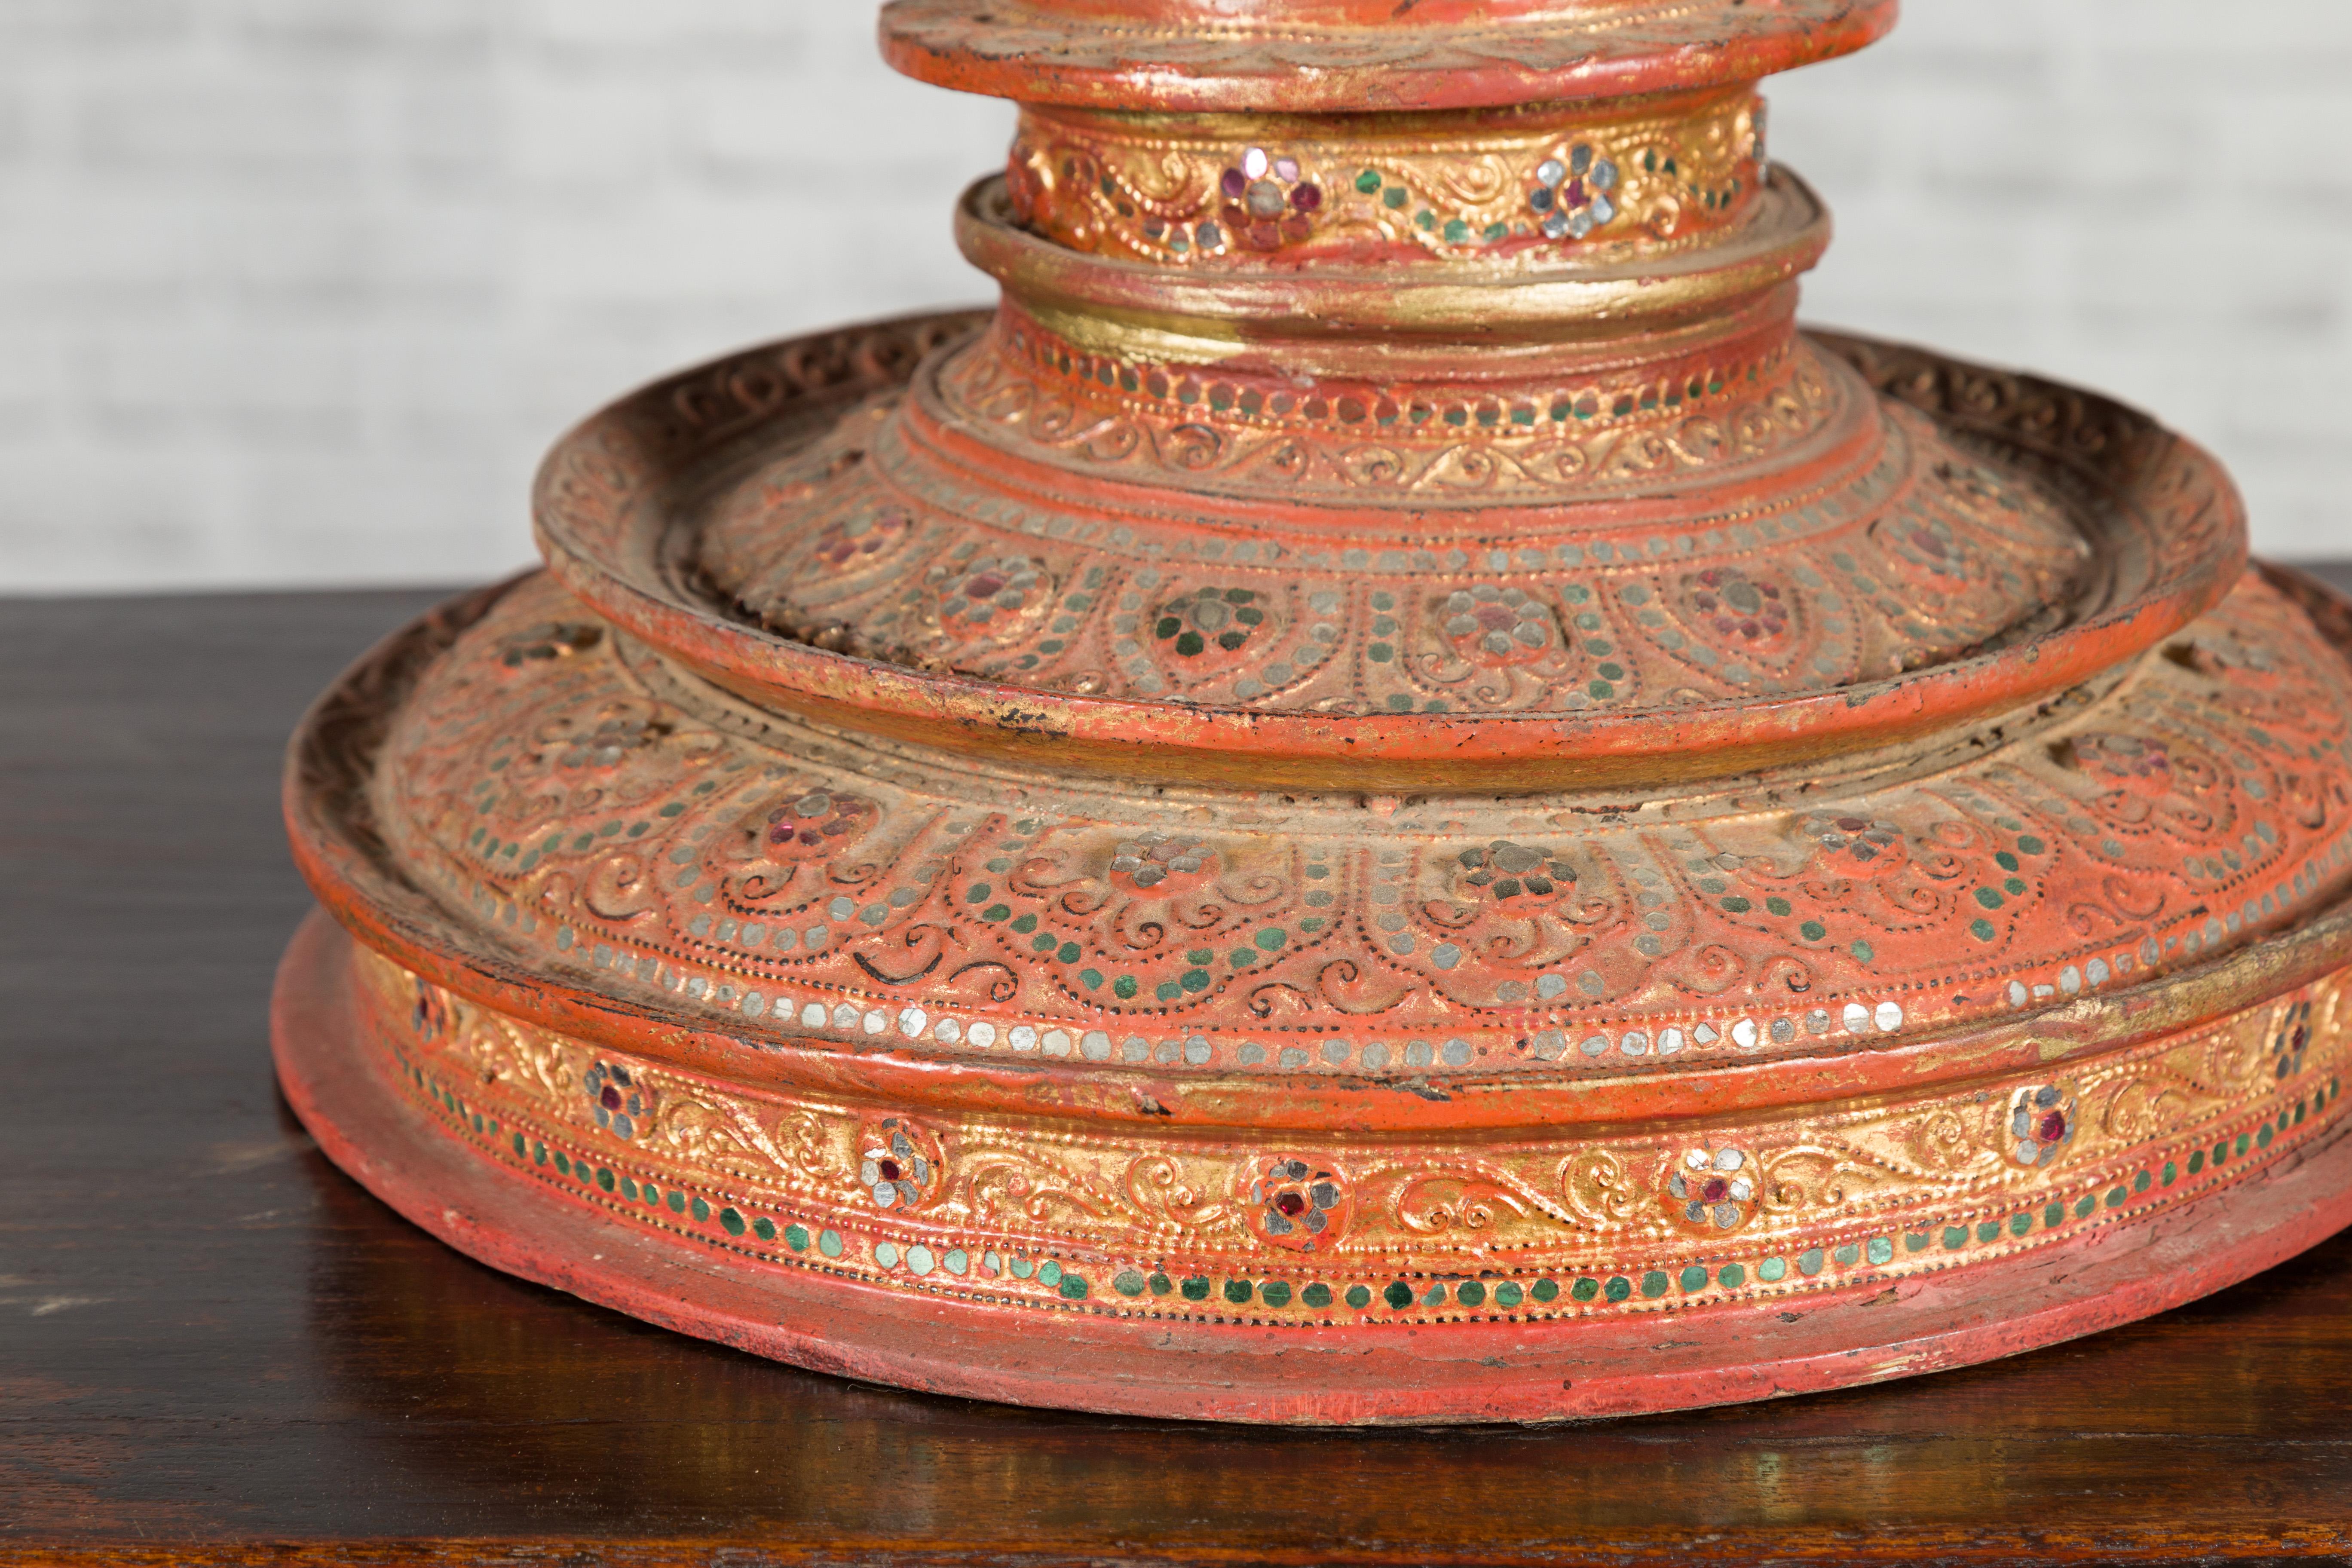 Antique Burmese Carved Teak Lidded Offering Bowl with Inlaid and Gilt Decor 6